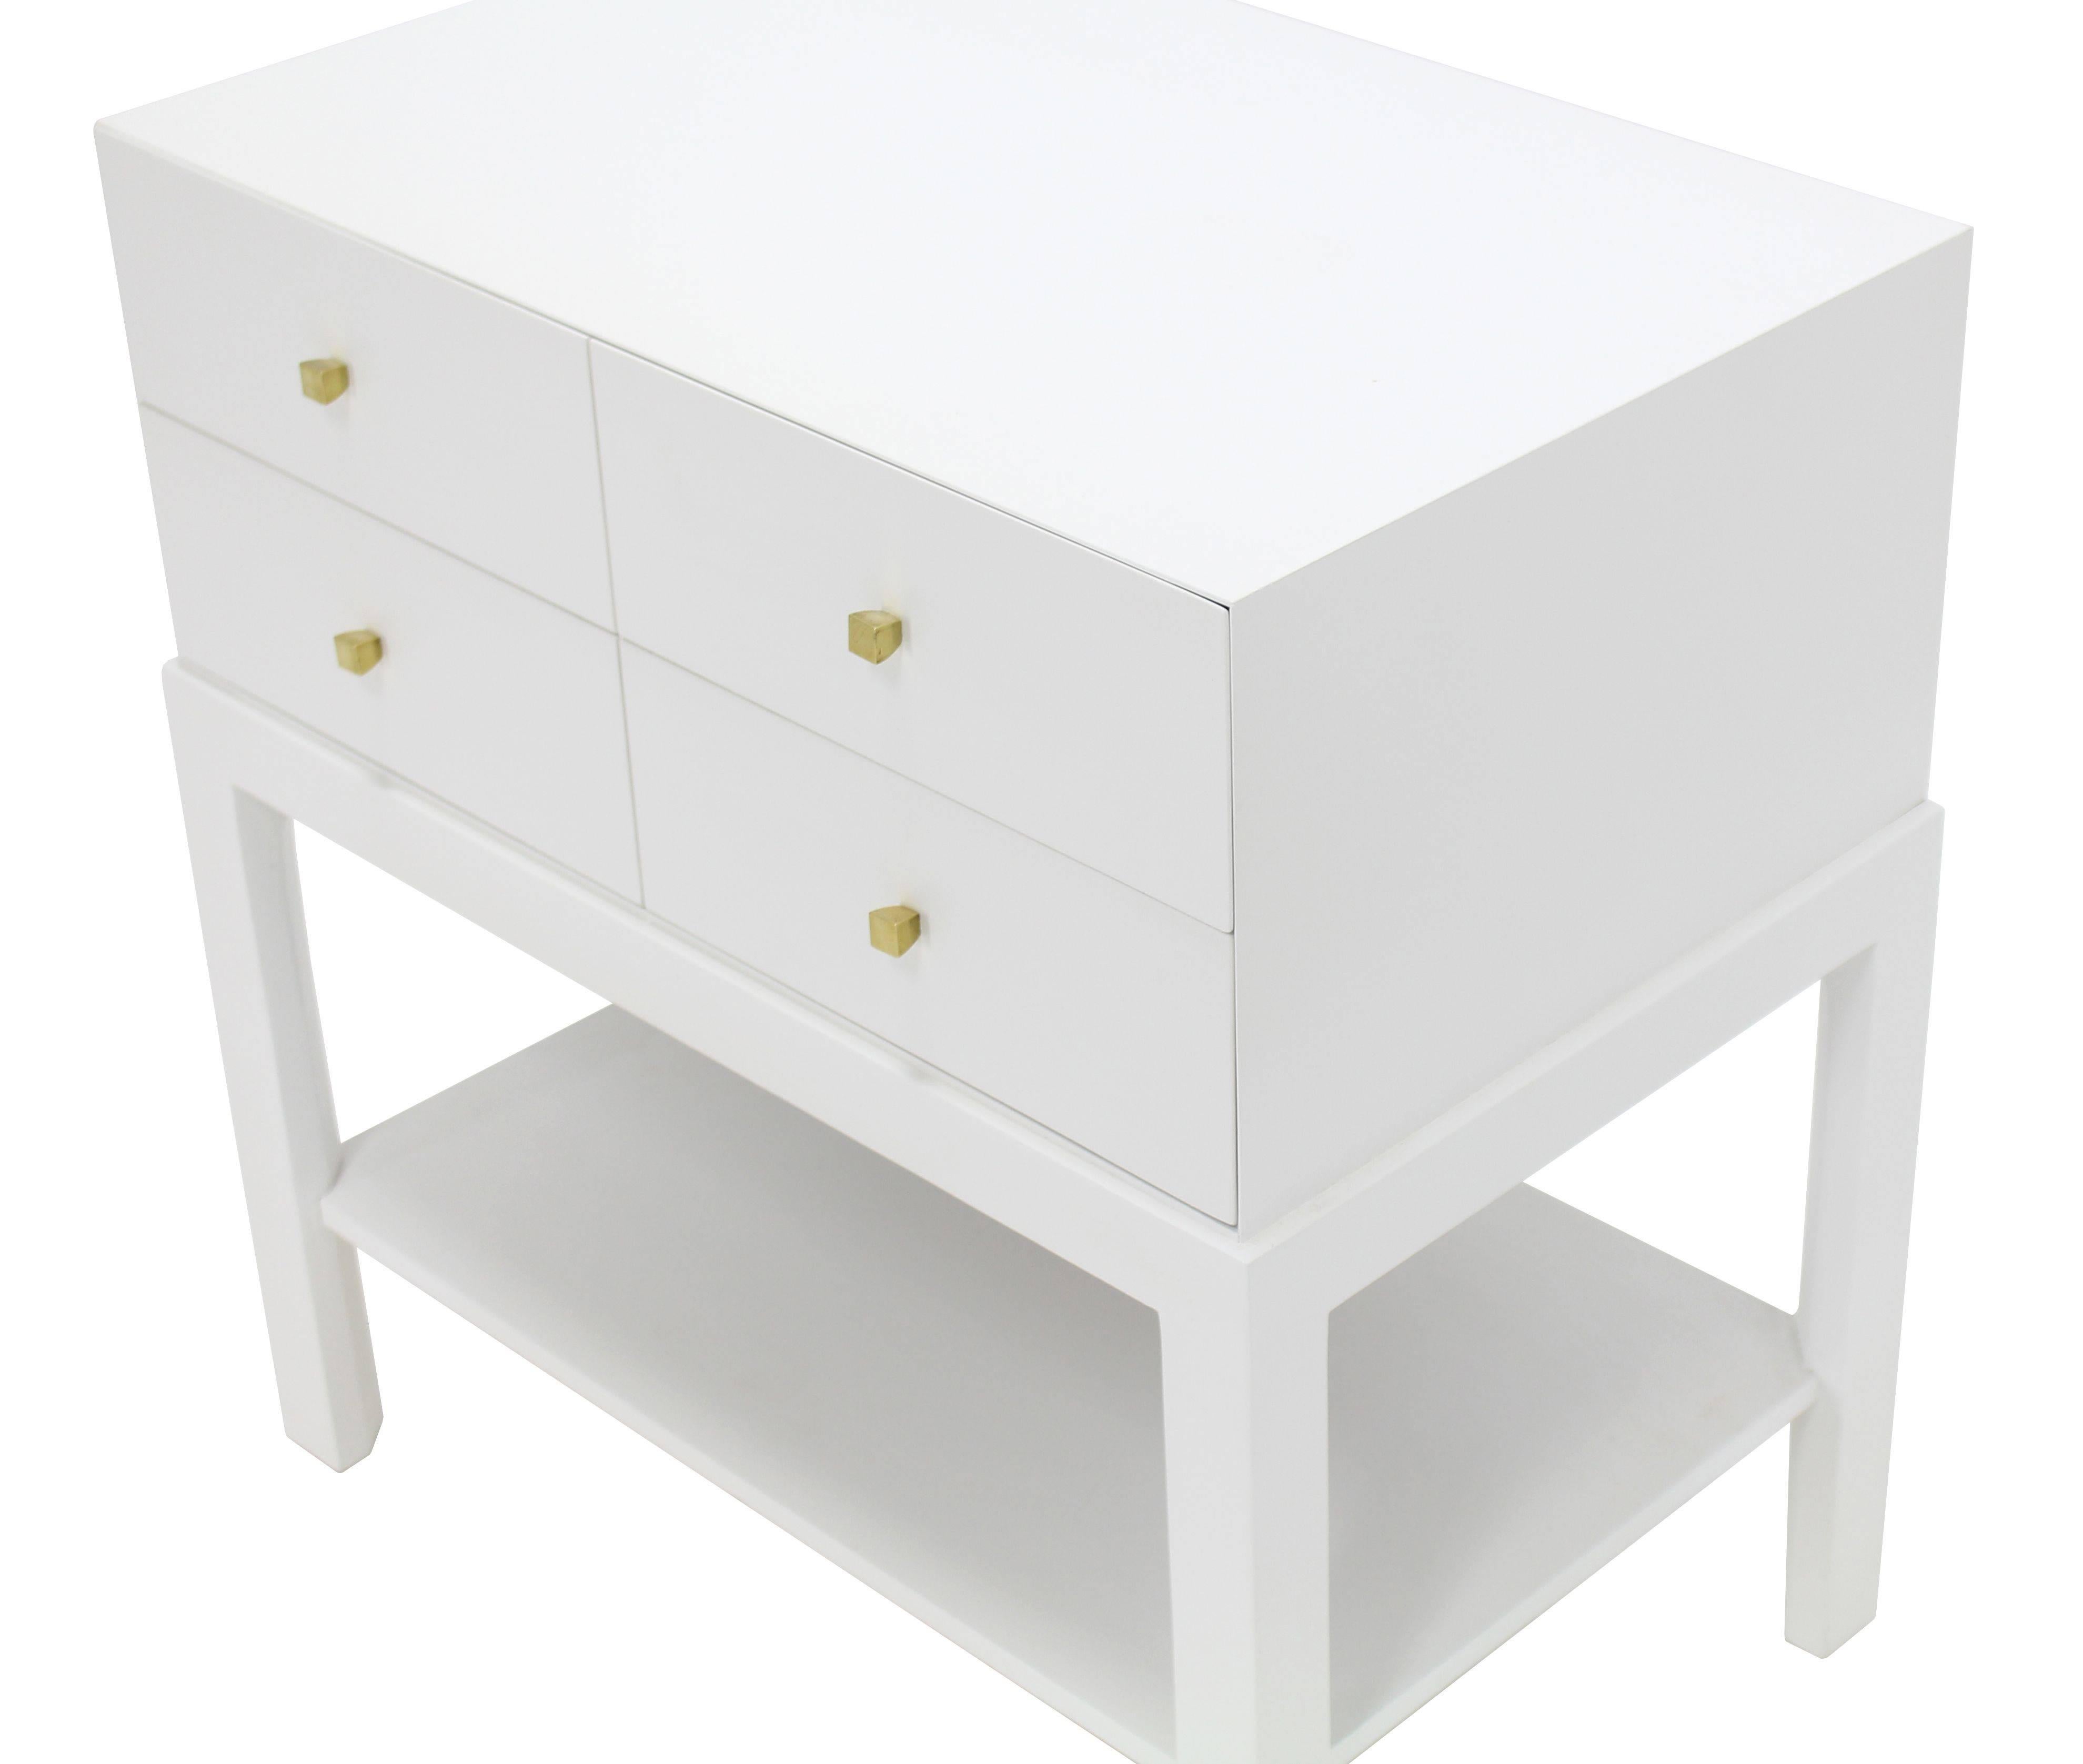 White Lacquer Diamond Shape Brass Dimond Pulls Two Drawer Nightstand In Excellent Condition For Sale In Rockaway, NJ